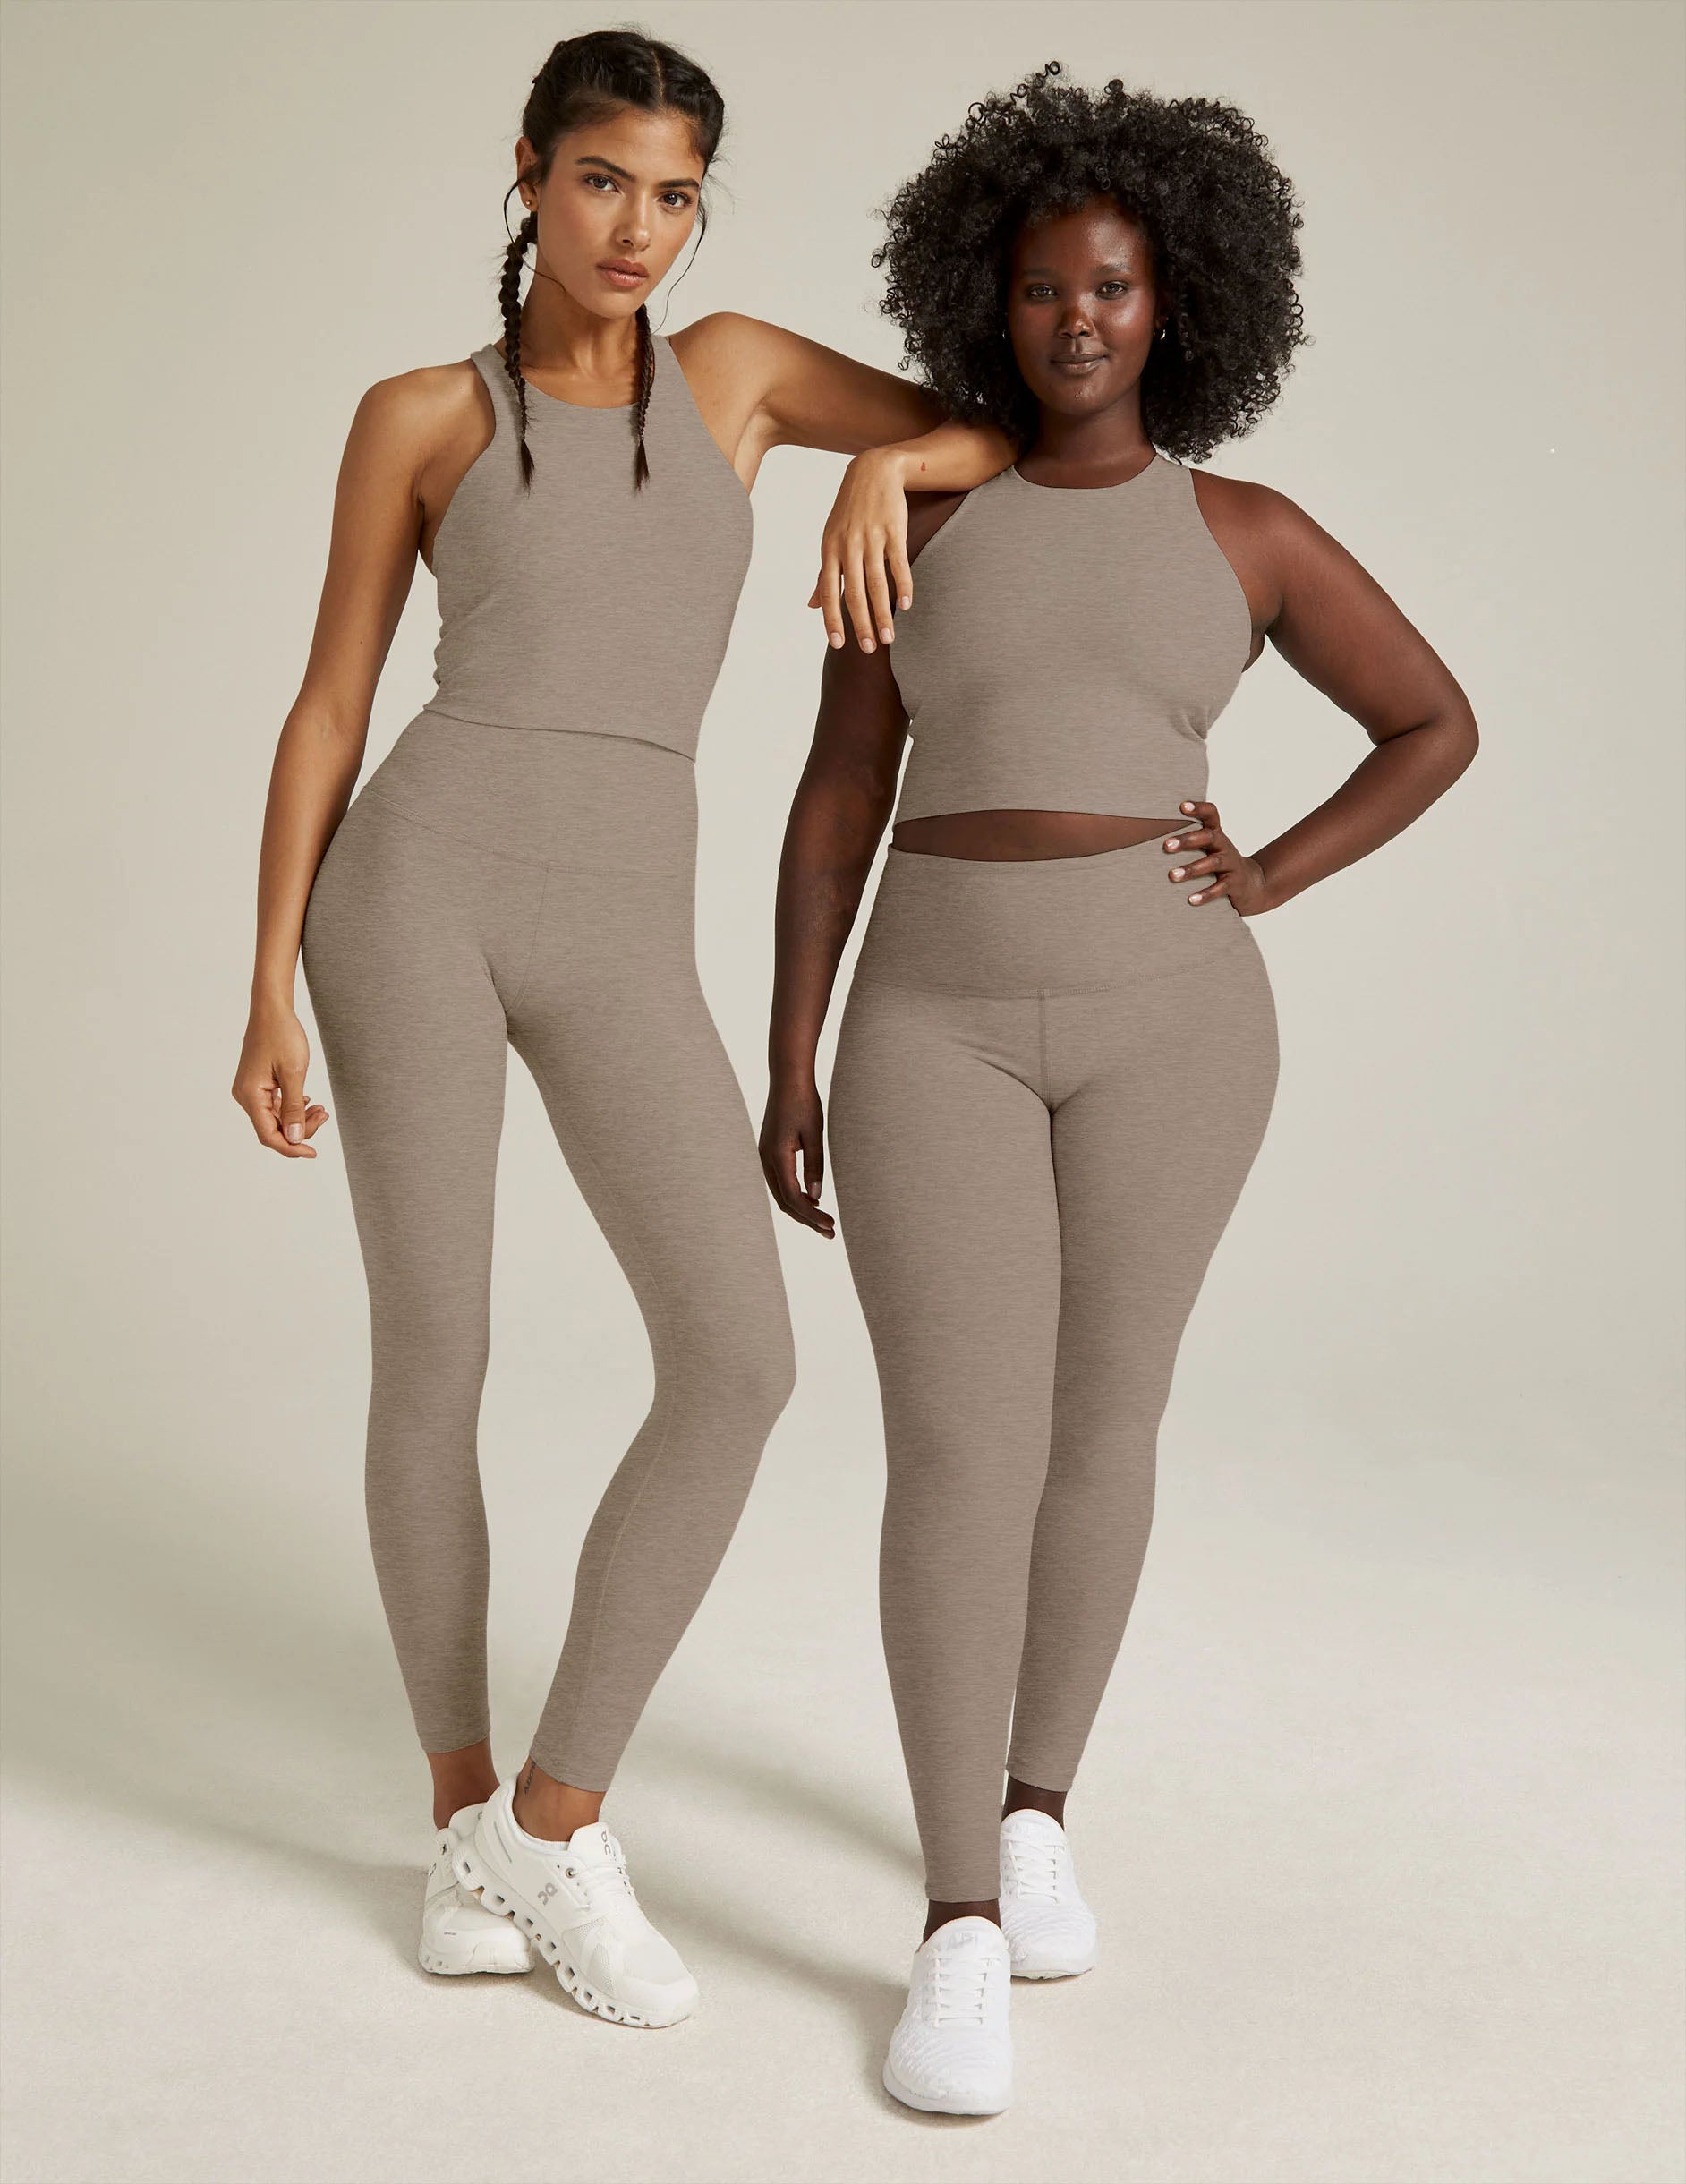  Beyond Yoga Women's Spacedye Outlines High Waisted Midi Leggings,  Birch/Cloud White, S : Clothing, Shoes & Jewelry